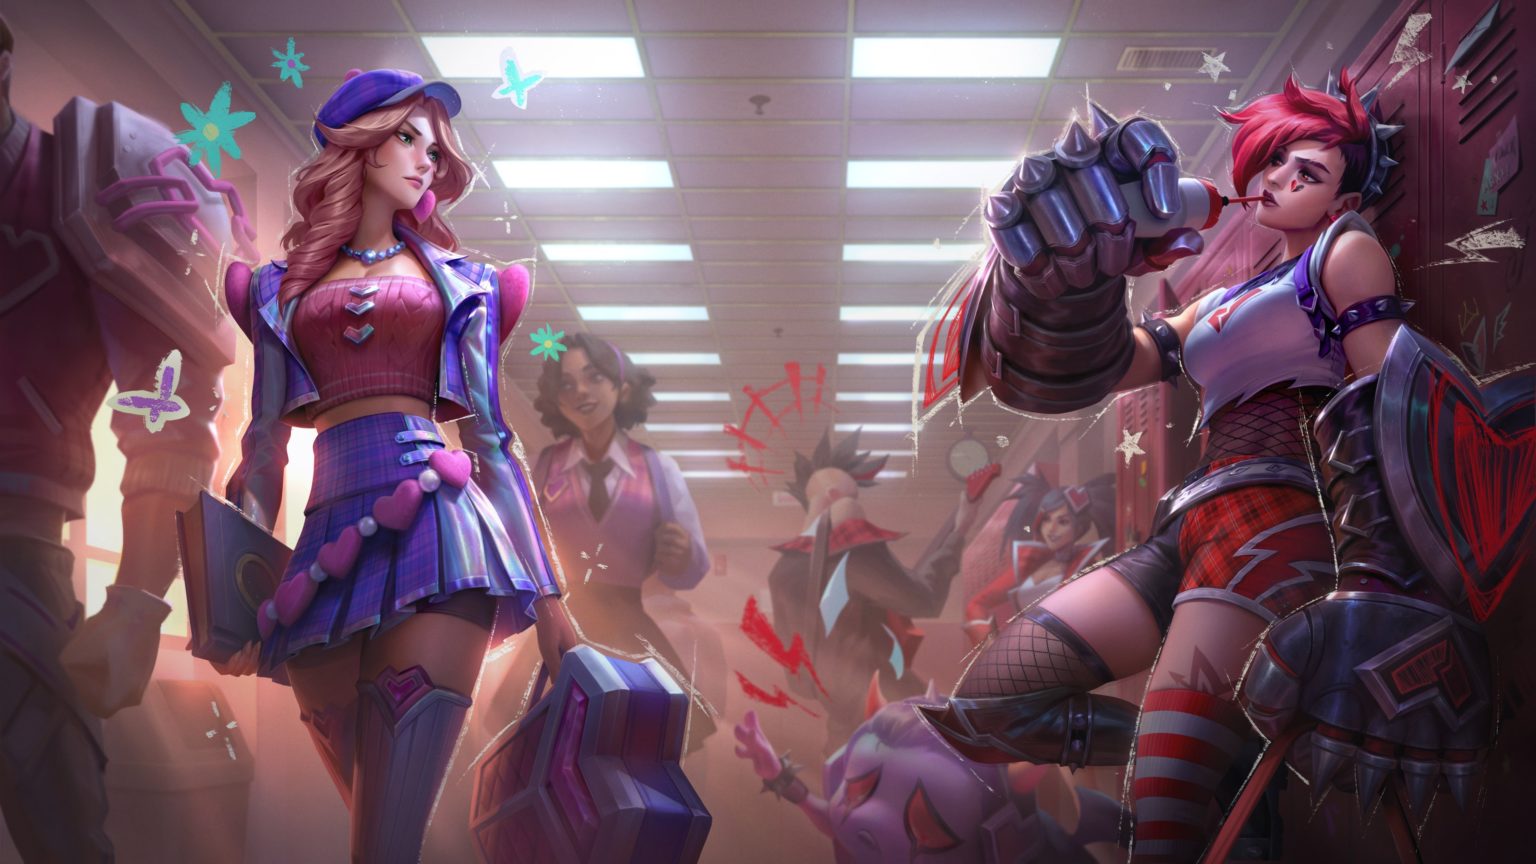 Shippers rejoice League's new Valentine's Day skins feature cute